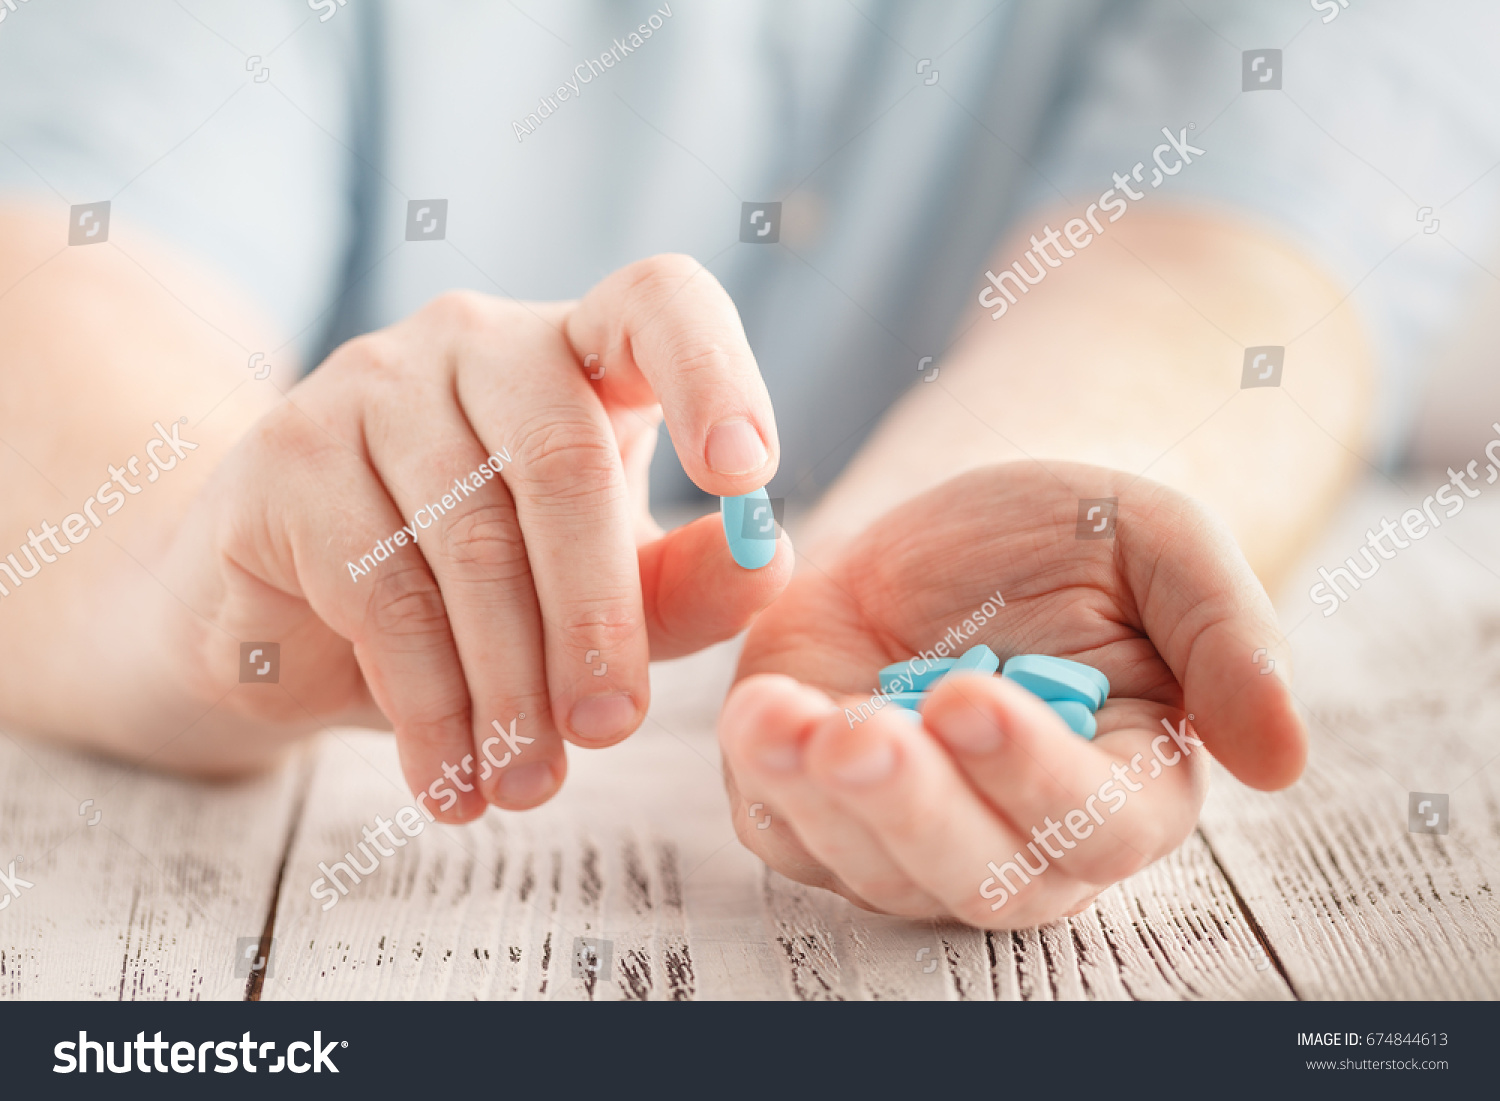 Male hand holding blue pills in palm #674844613